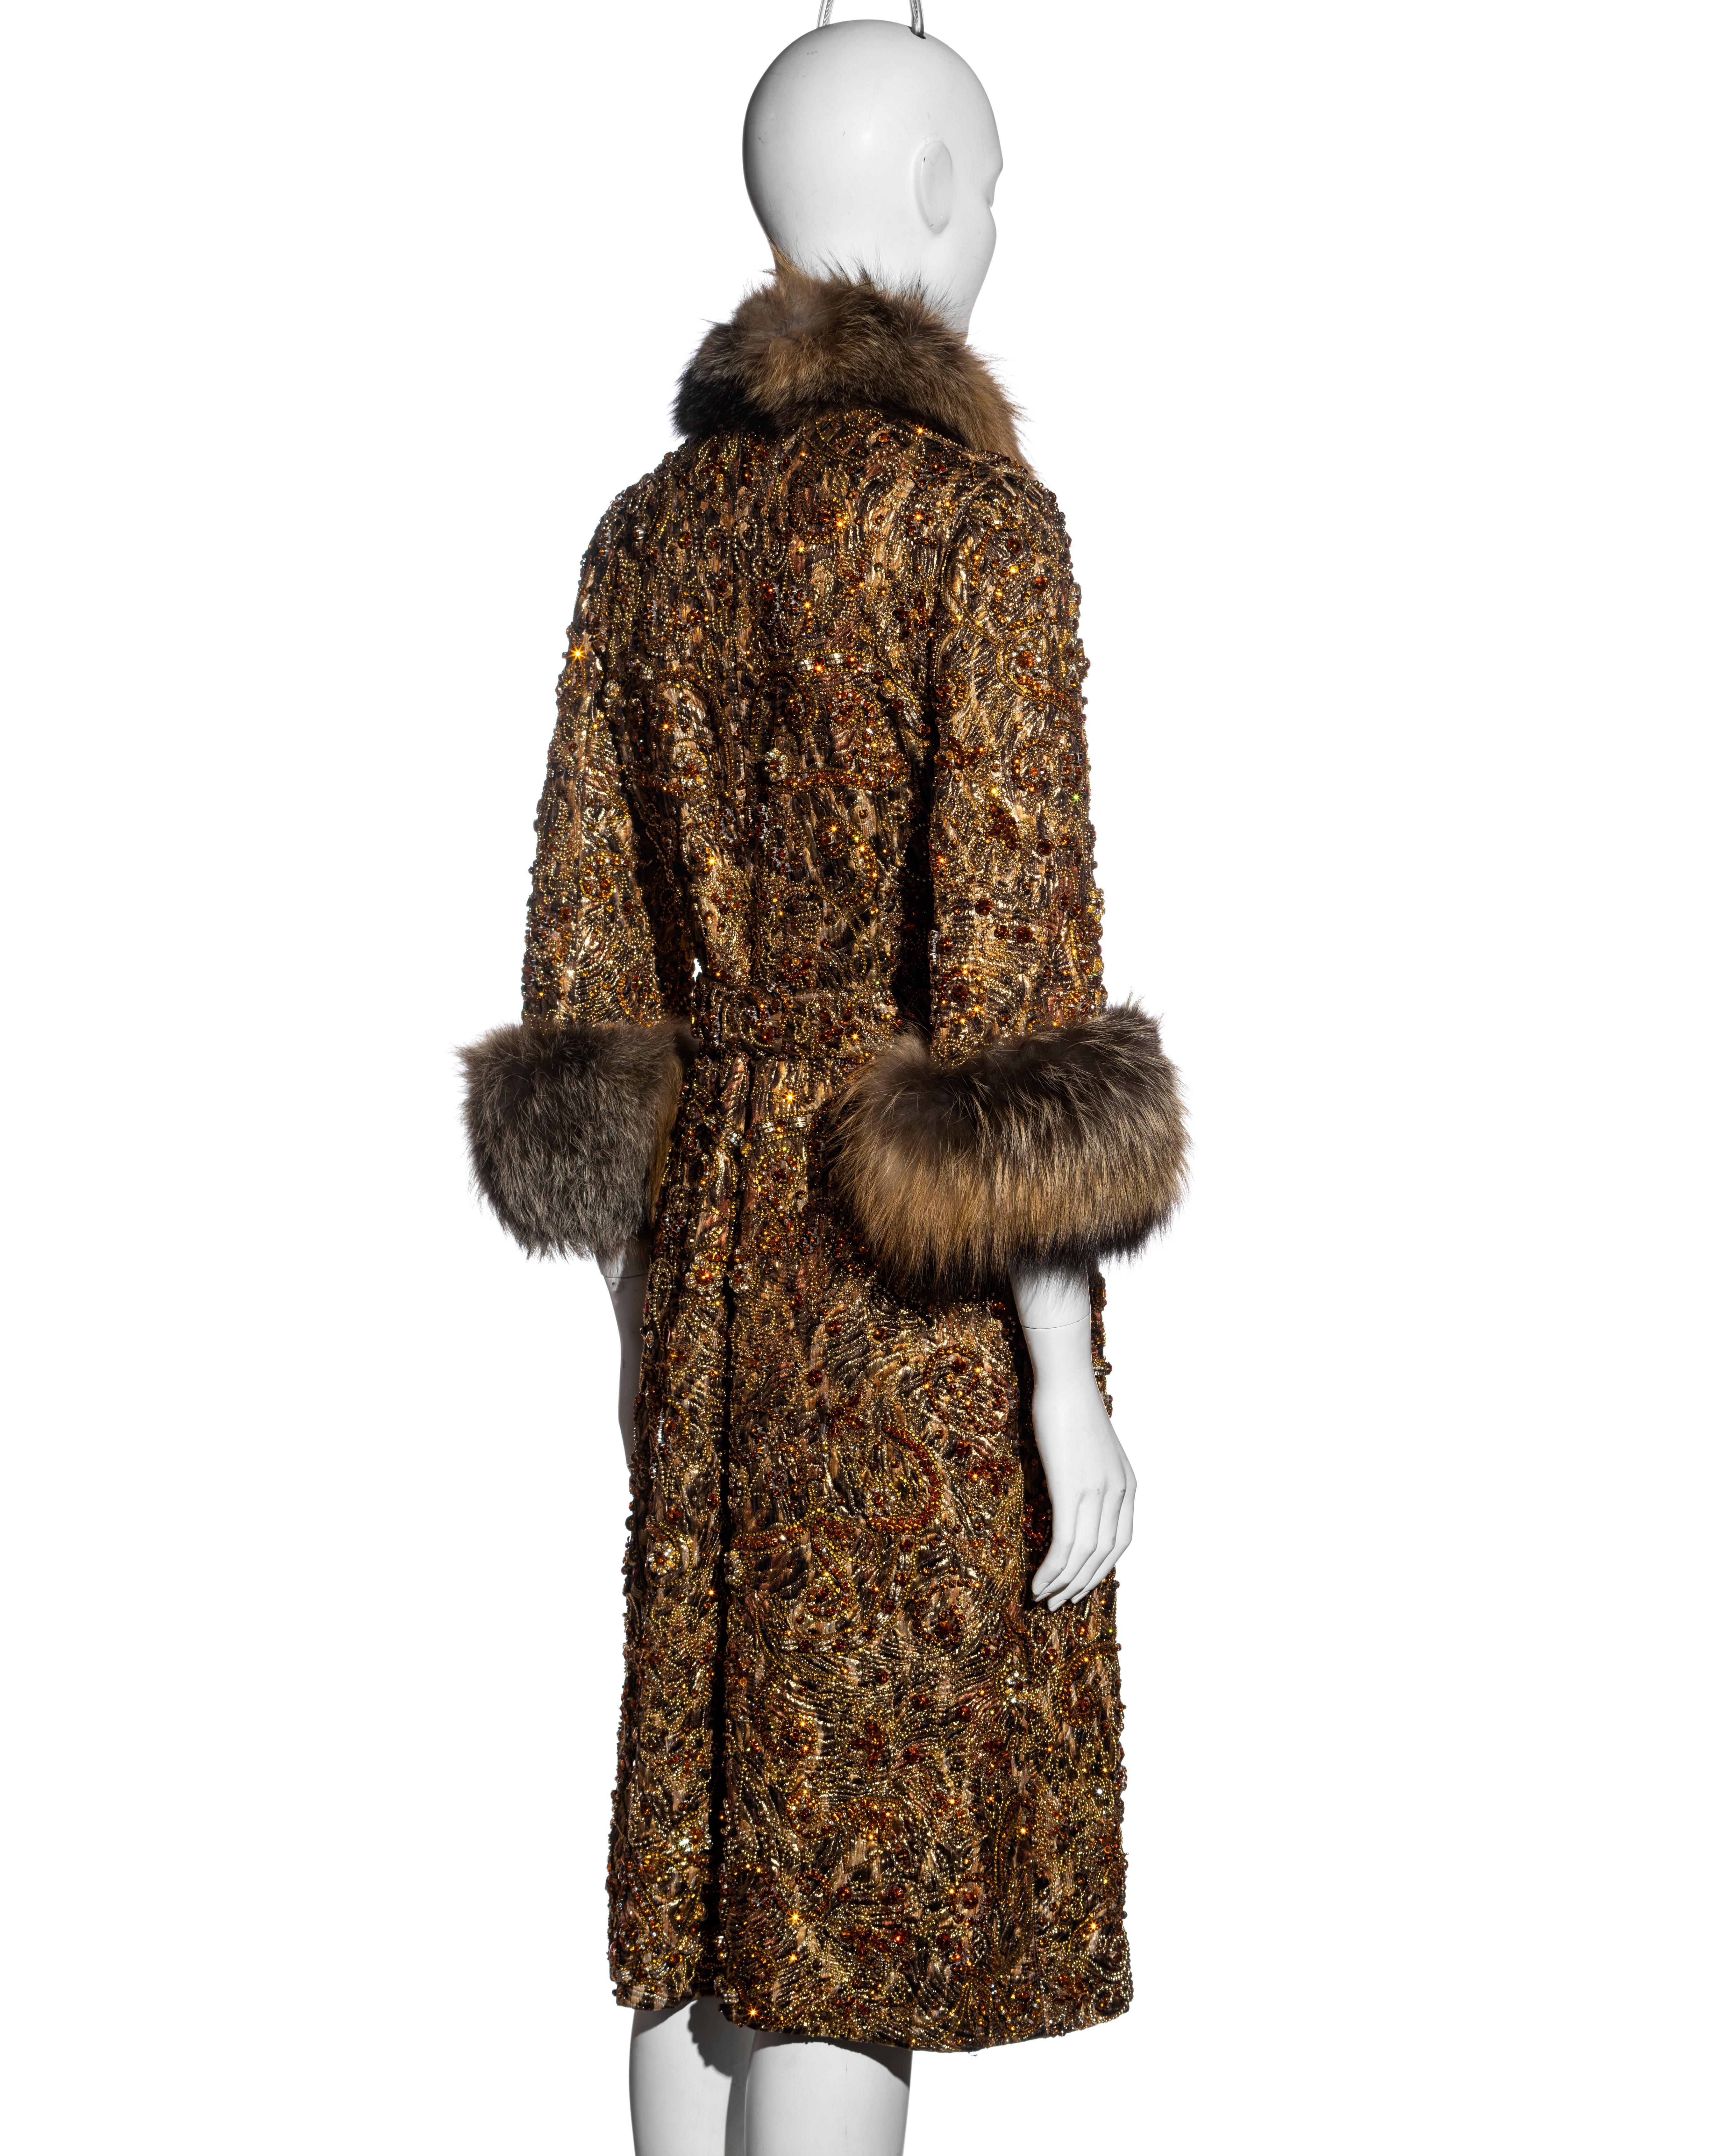 Dolce & Gabbana brocade and fox fur crystal embellished evening coat, fw 2004 For Sale 5